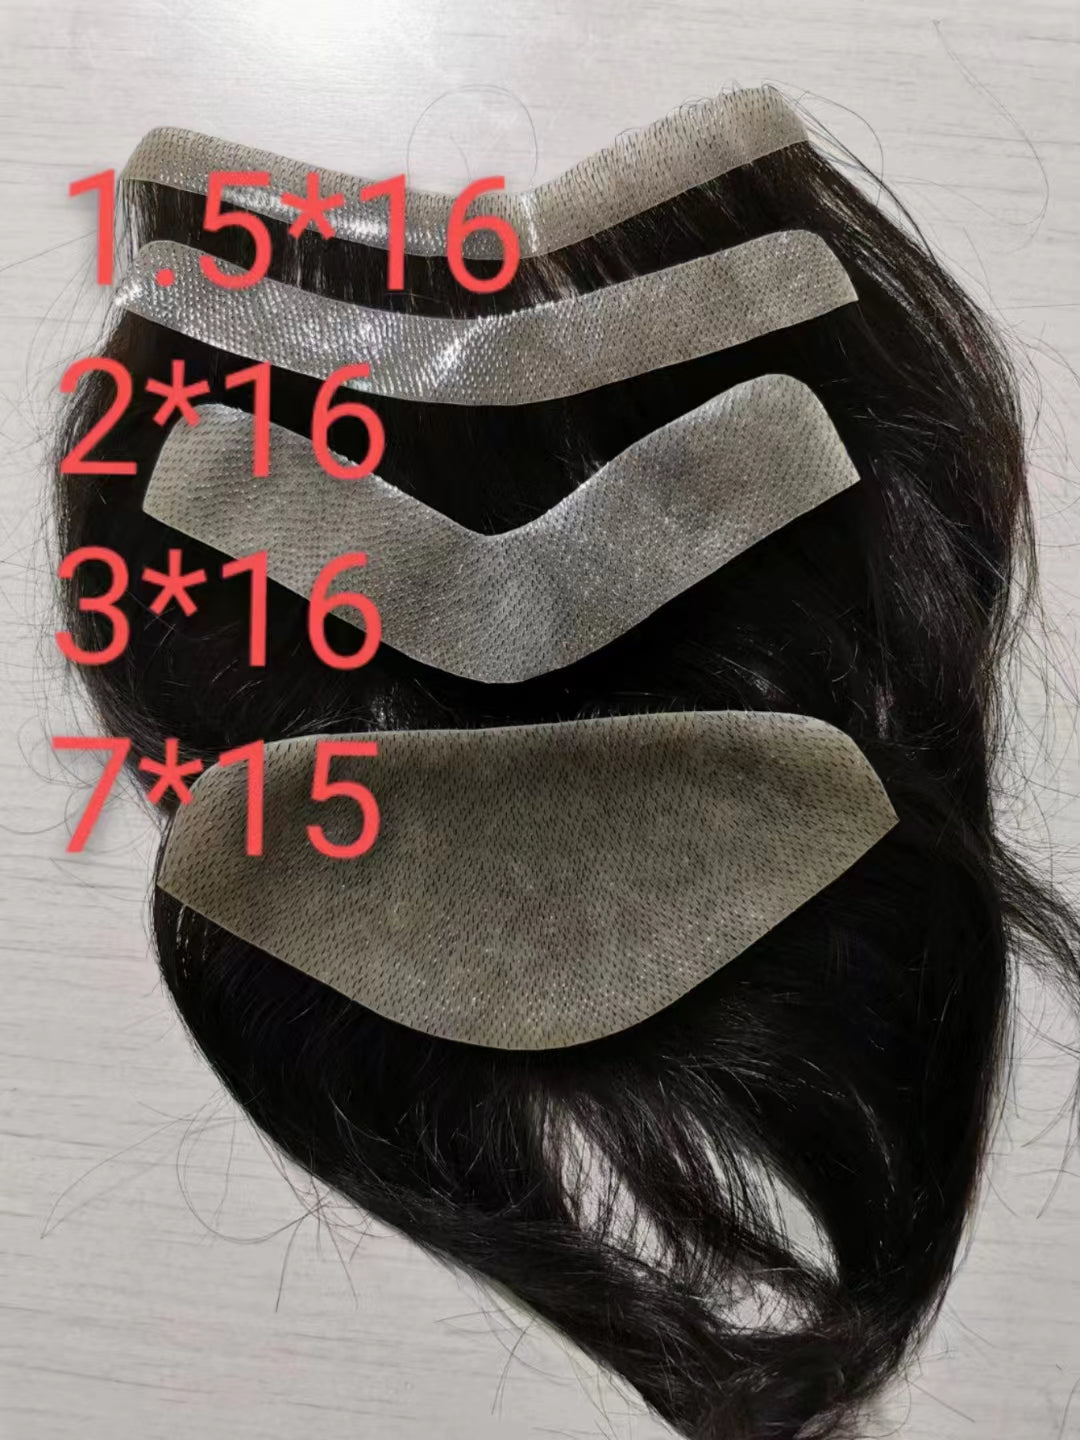 V-Shape Toupee for Men Real Human Hair Men Forehead Topper Hairpiece Thin Human Hair Toupee Replacement Skin Frontal